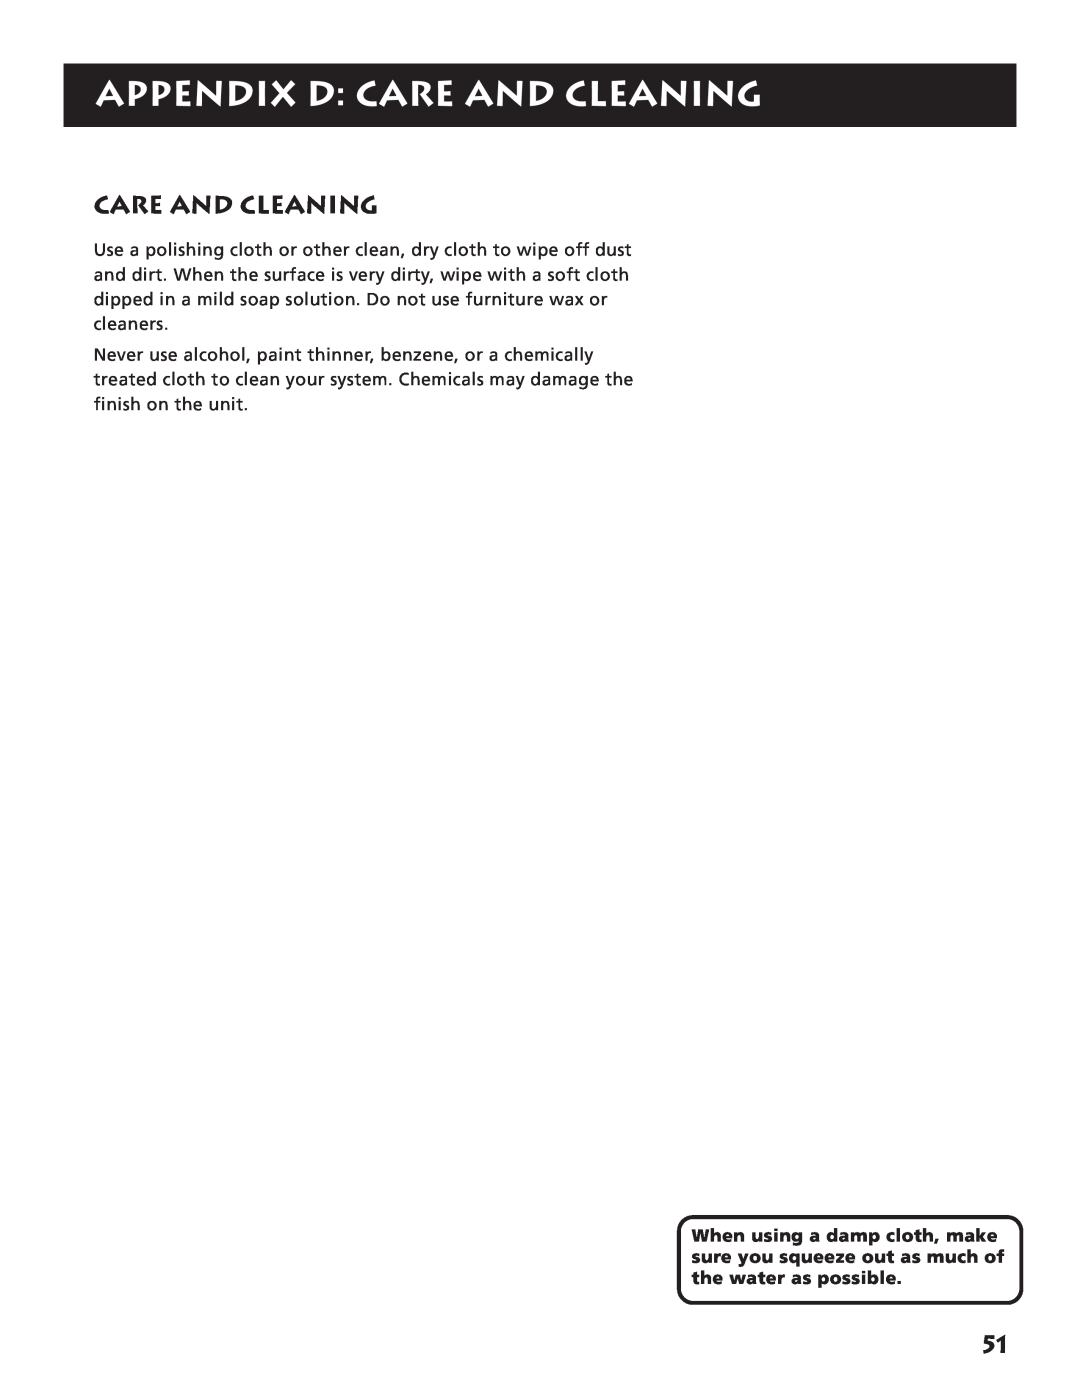 RCA RV3693 manual Appendix D Care And Cleaning 